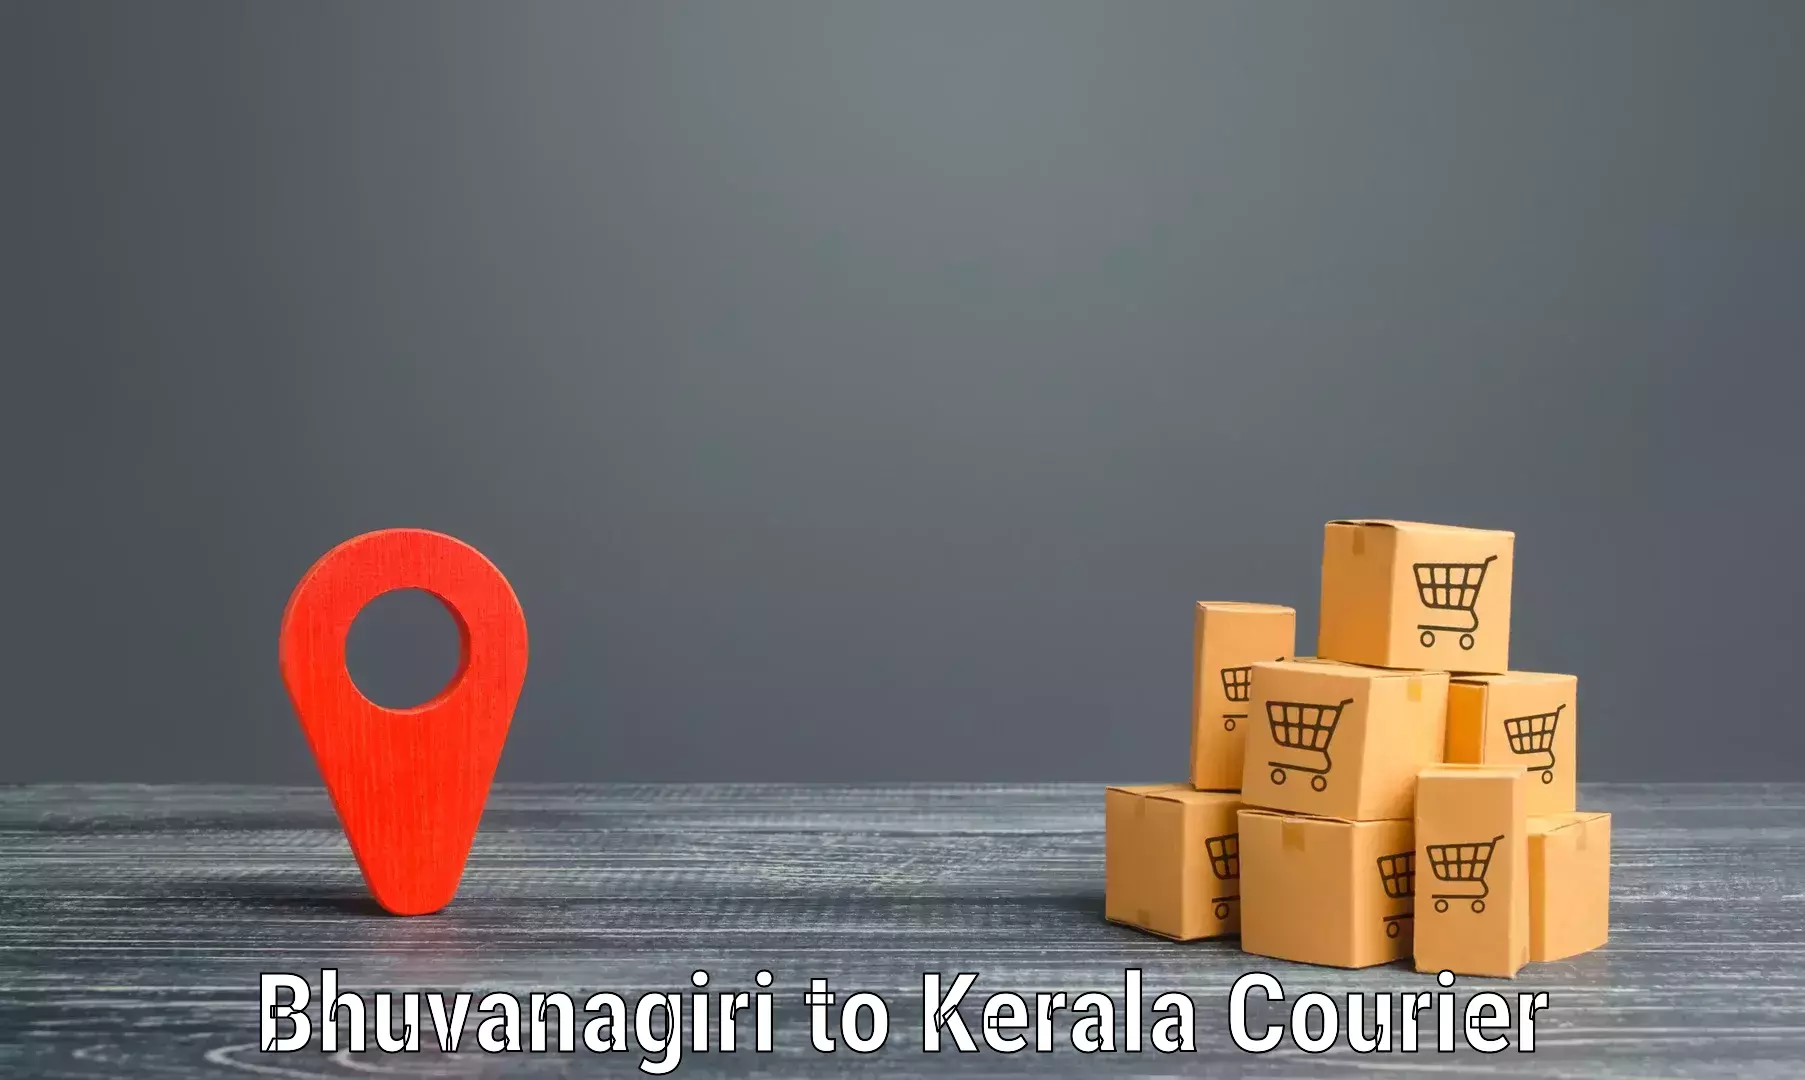 Automated shipping Bhuvanagiri to Cochin University of Science and Technology